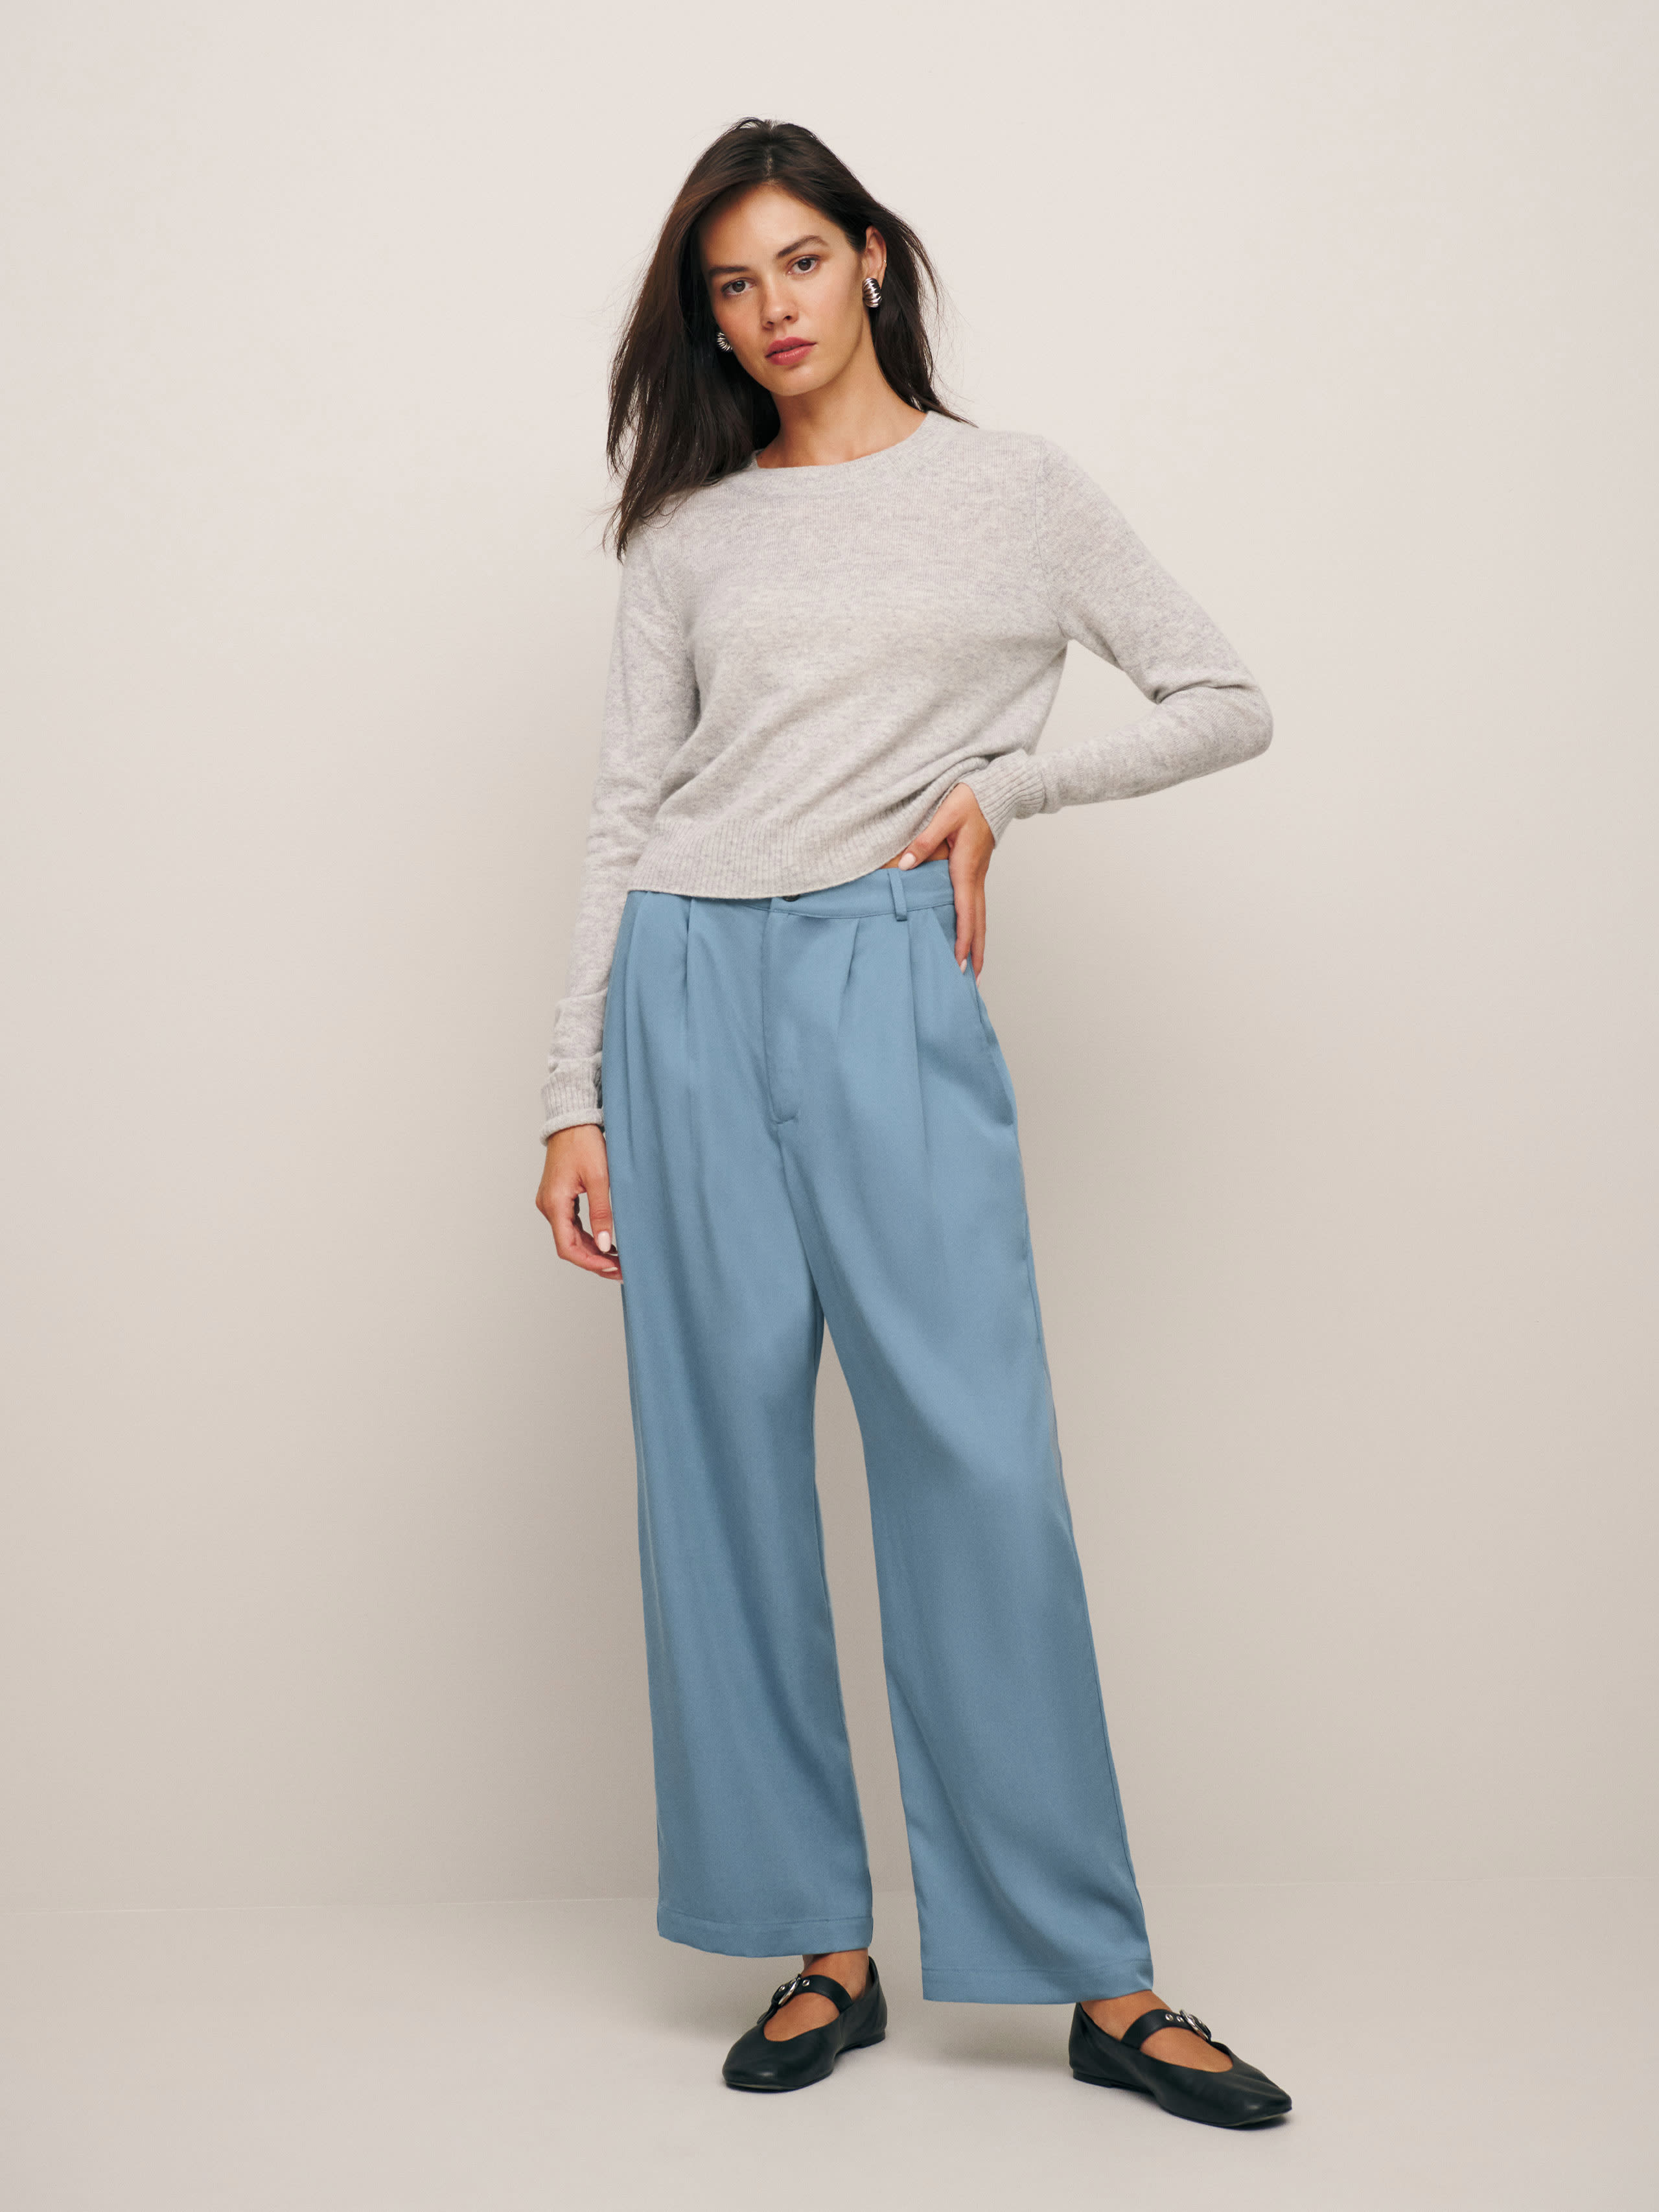 Reformation Mason Cropped Pant In Bluejay